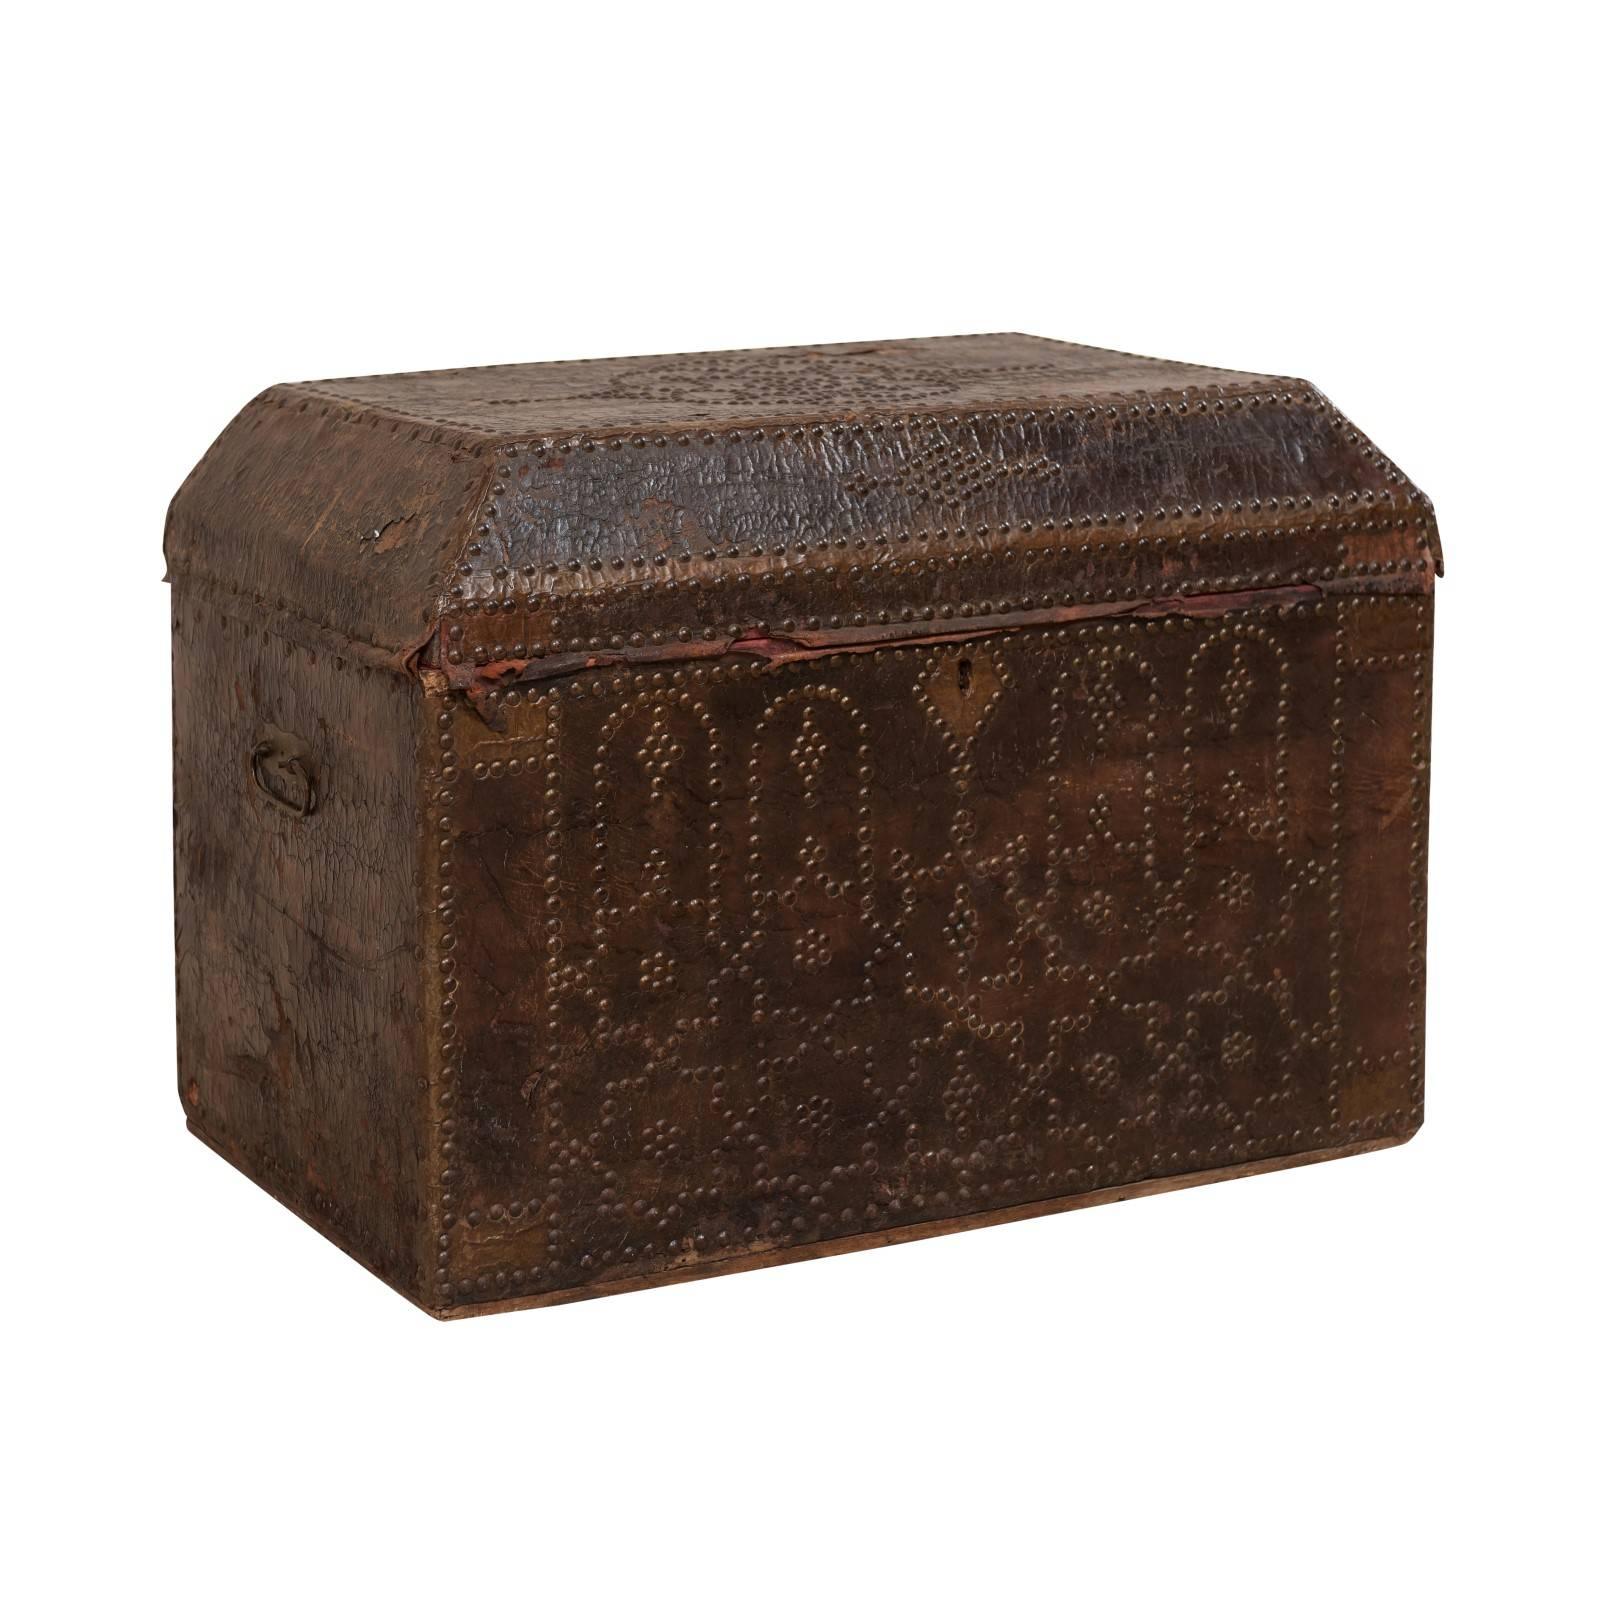 19th Century Spanish Leather Covered Trunk Ornately Decorated with Brass Studs